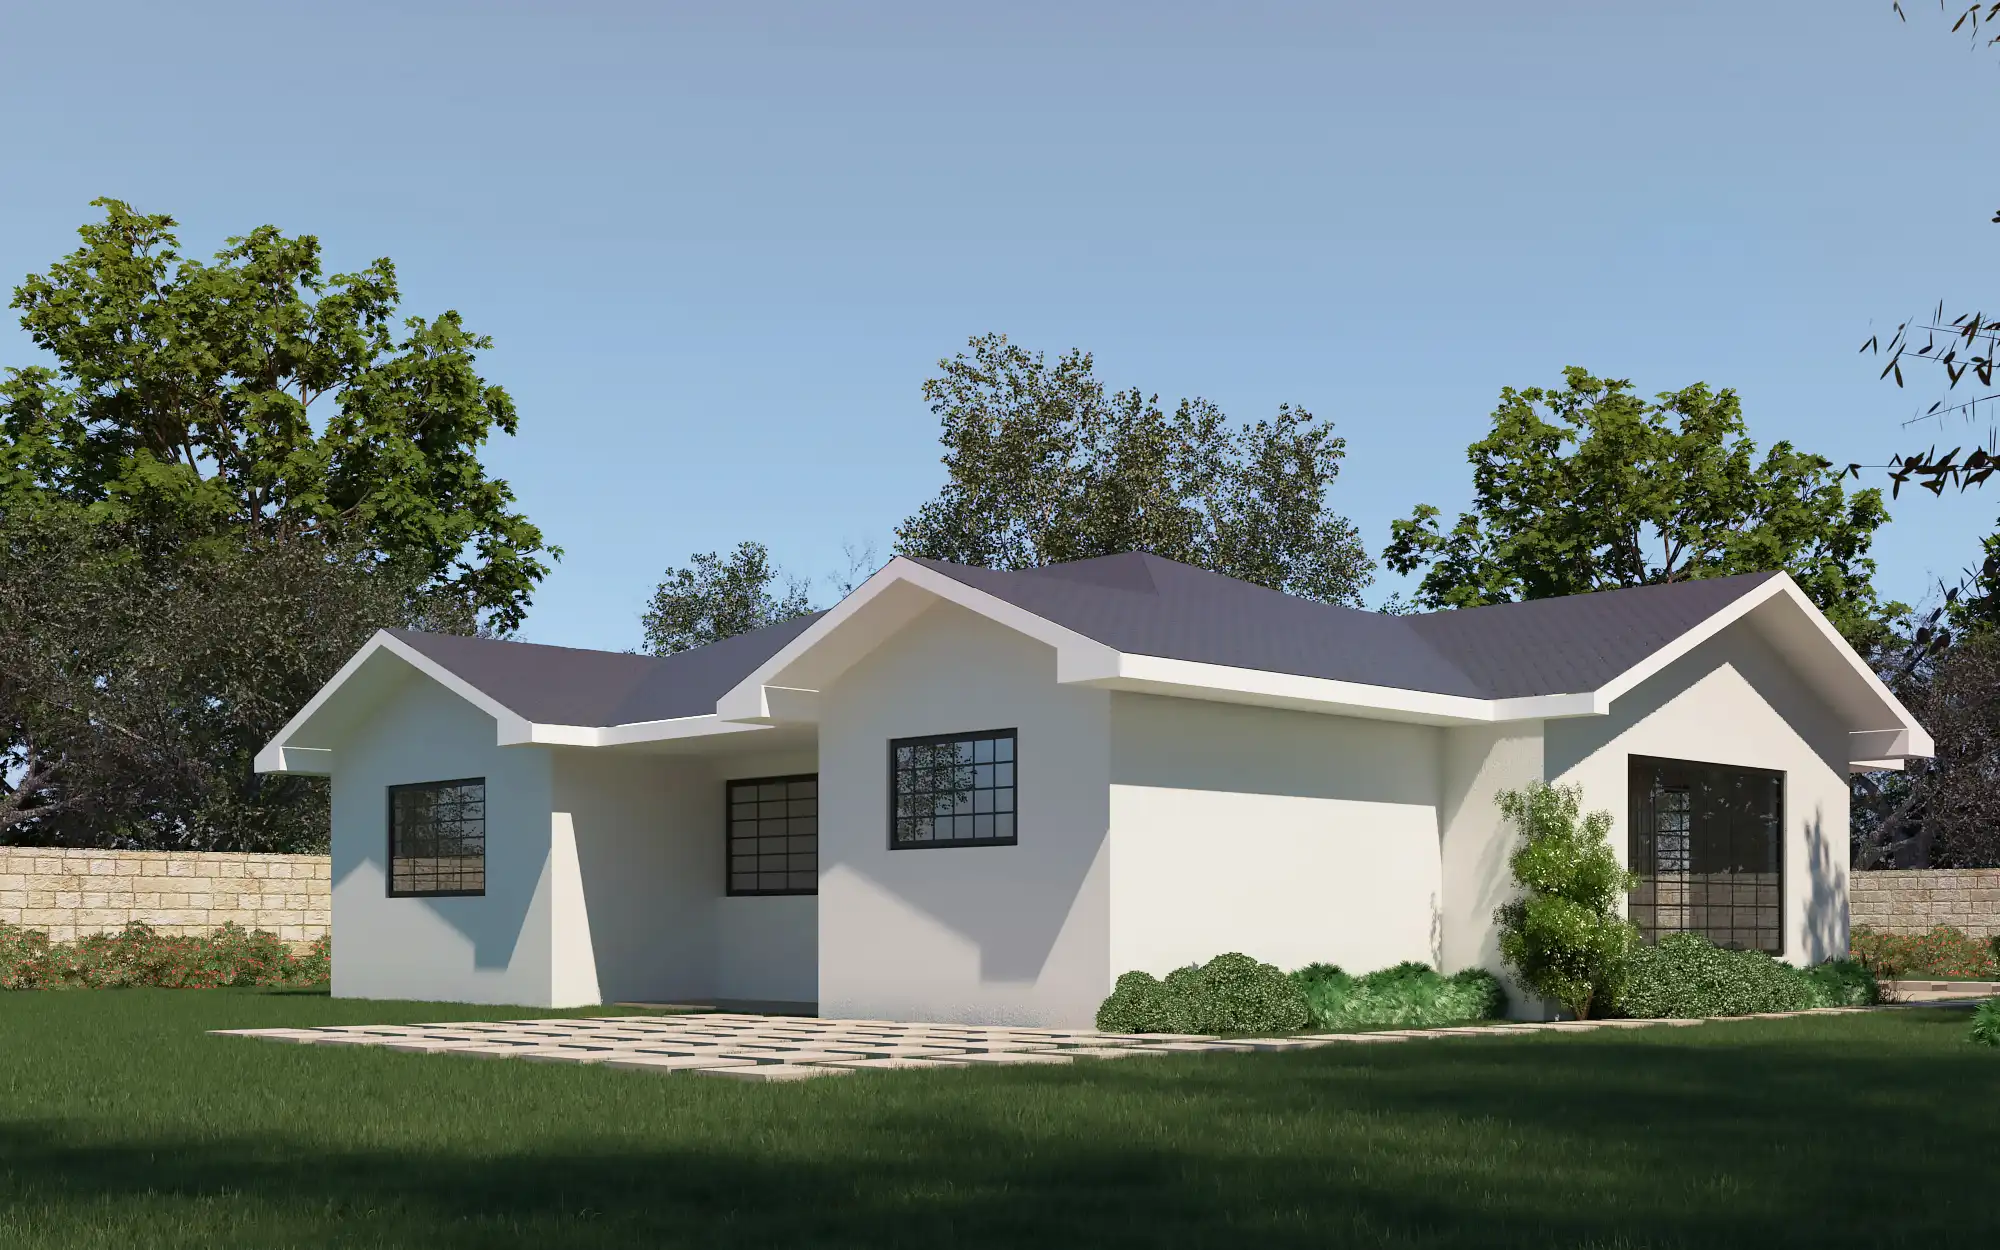 3 Bed Bungalow -ID 3161 - 3161_back.jpg from Inuua Tujenge house plans with 3 bedrooms and 2 bathrooms. ( bungalow )